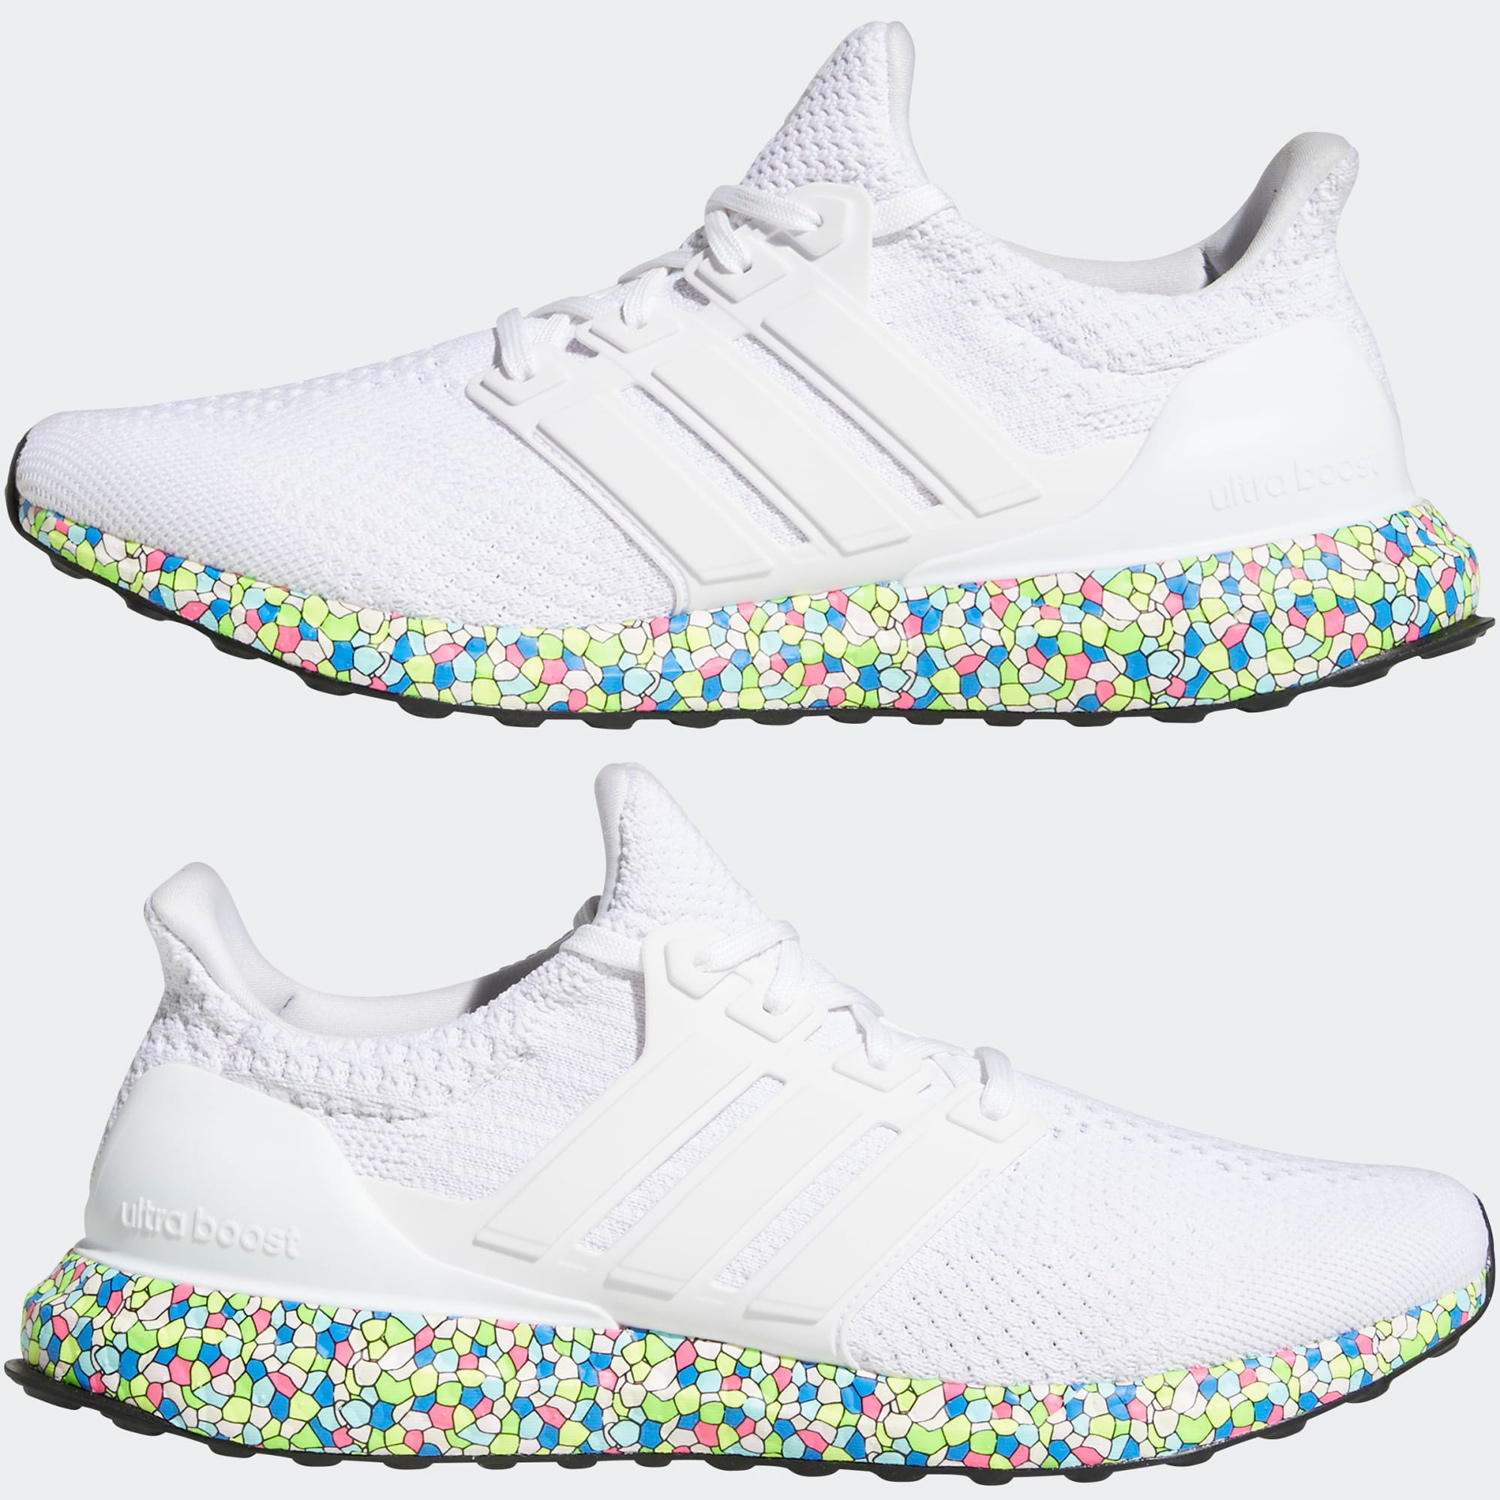 adidas-ultraboost-5-dna-boost-for-breakfast-shoes